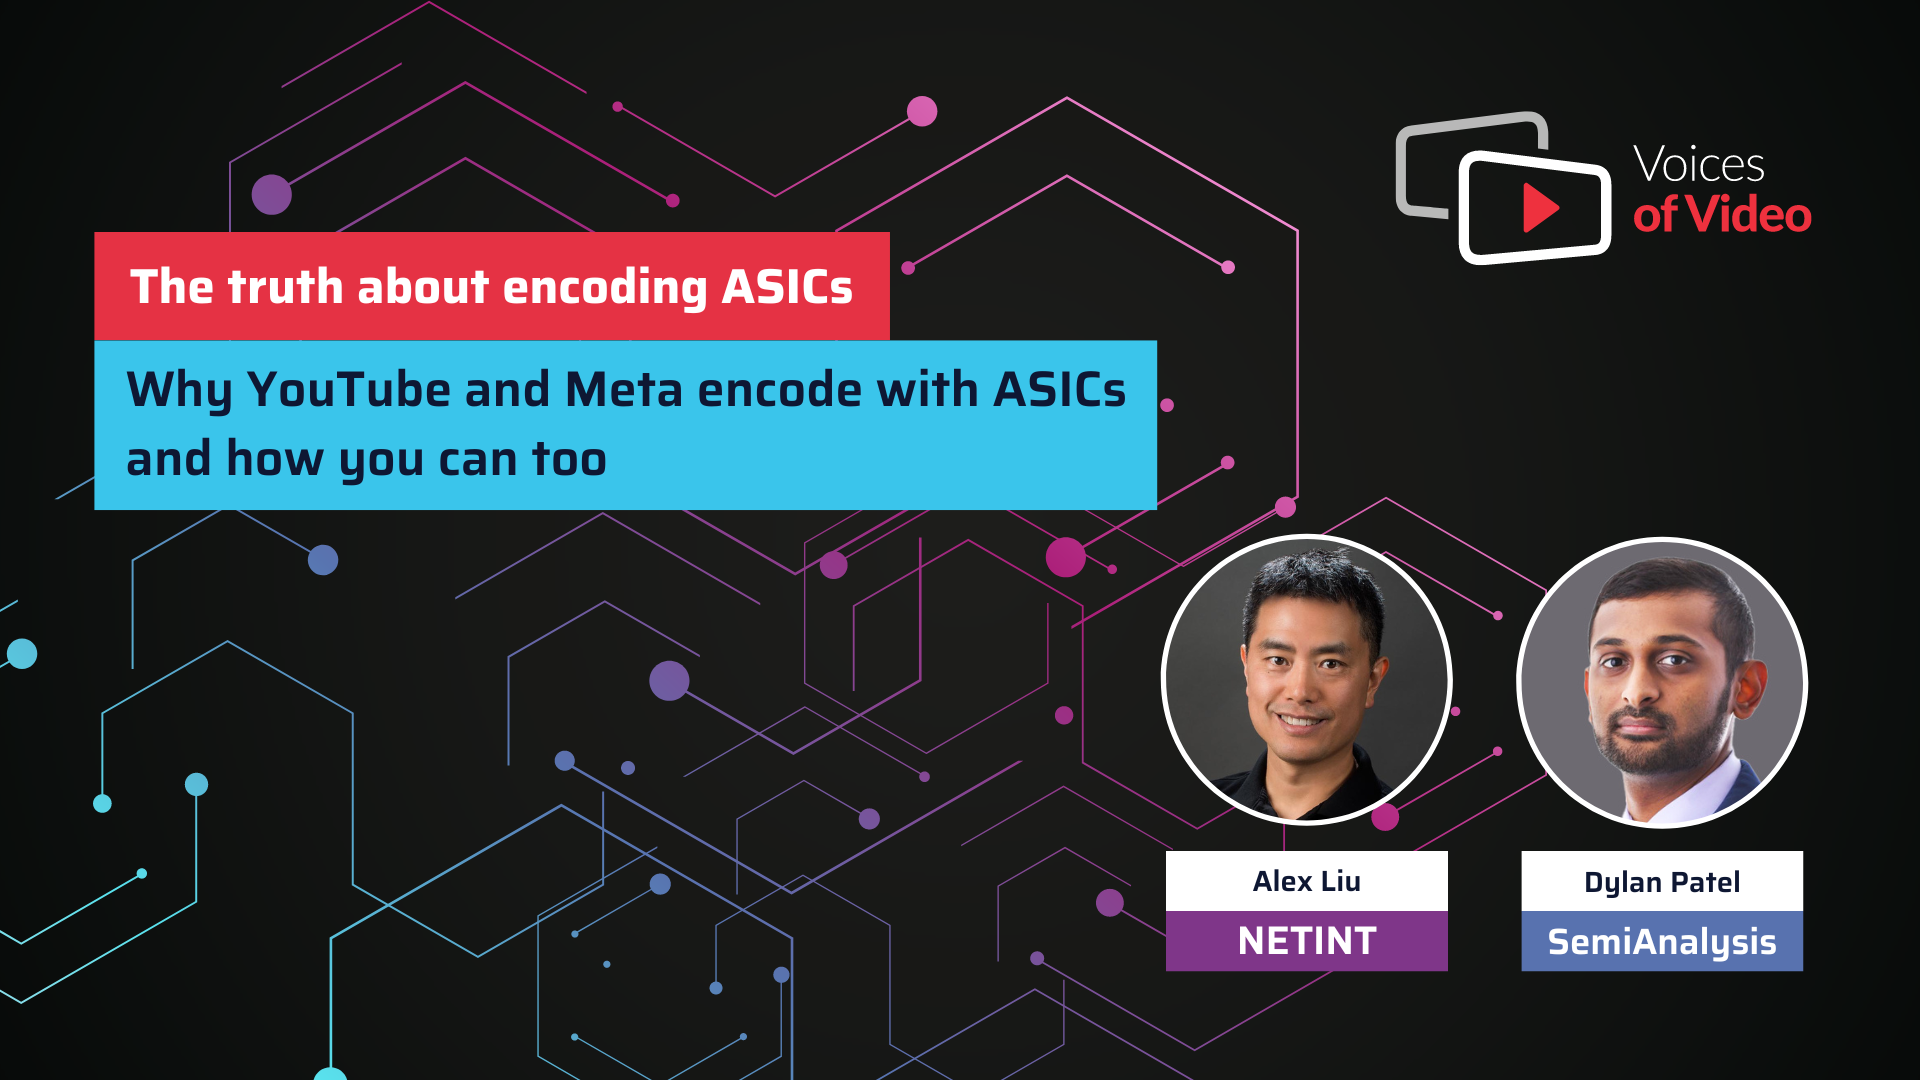 Why YouTube and Meta encode with ASIC - Daylan Patel from Semi Analysis and Alex Liu from NETINT.